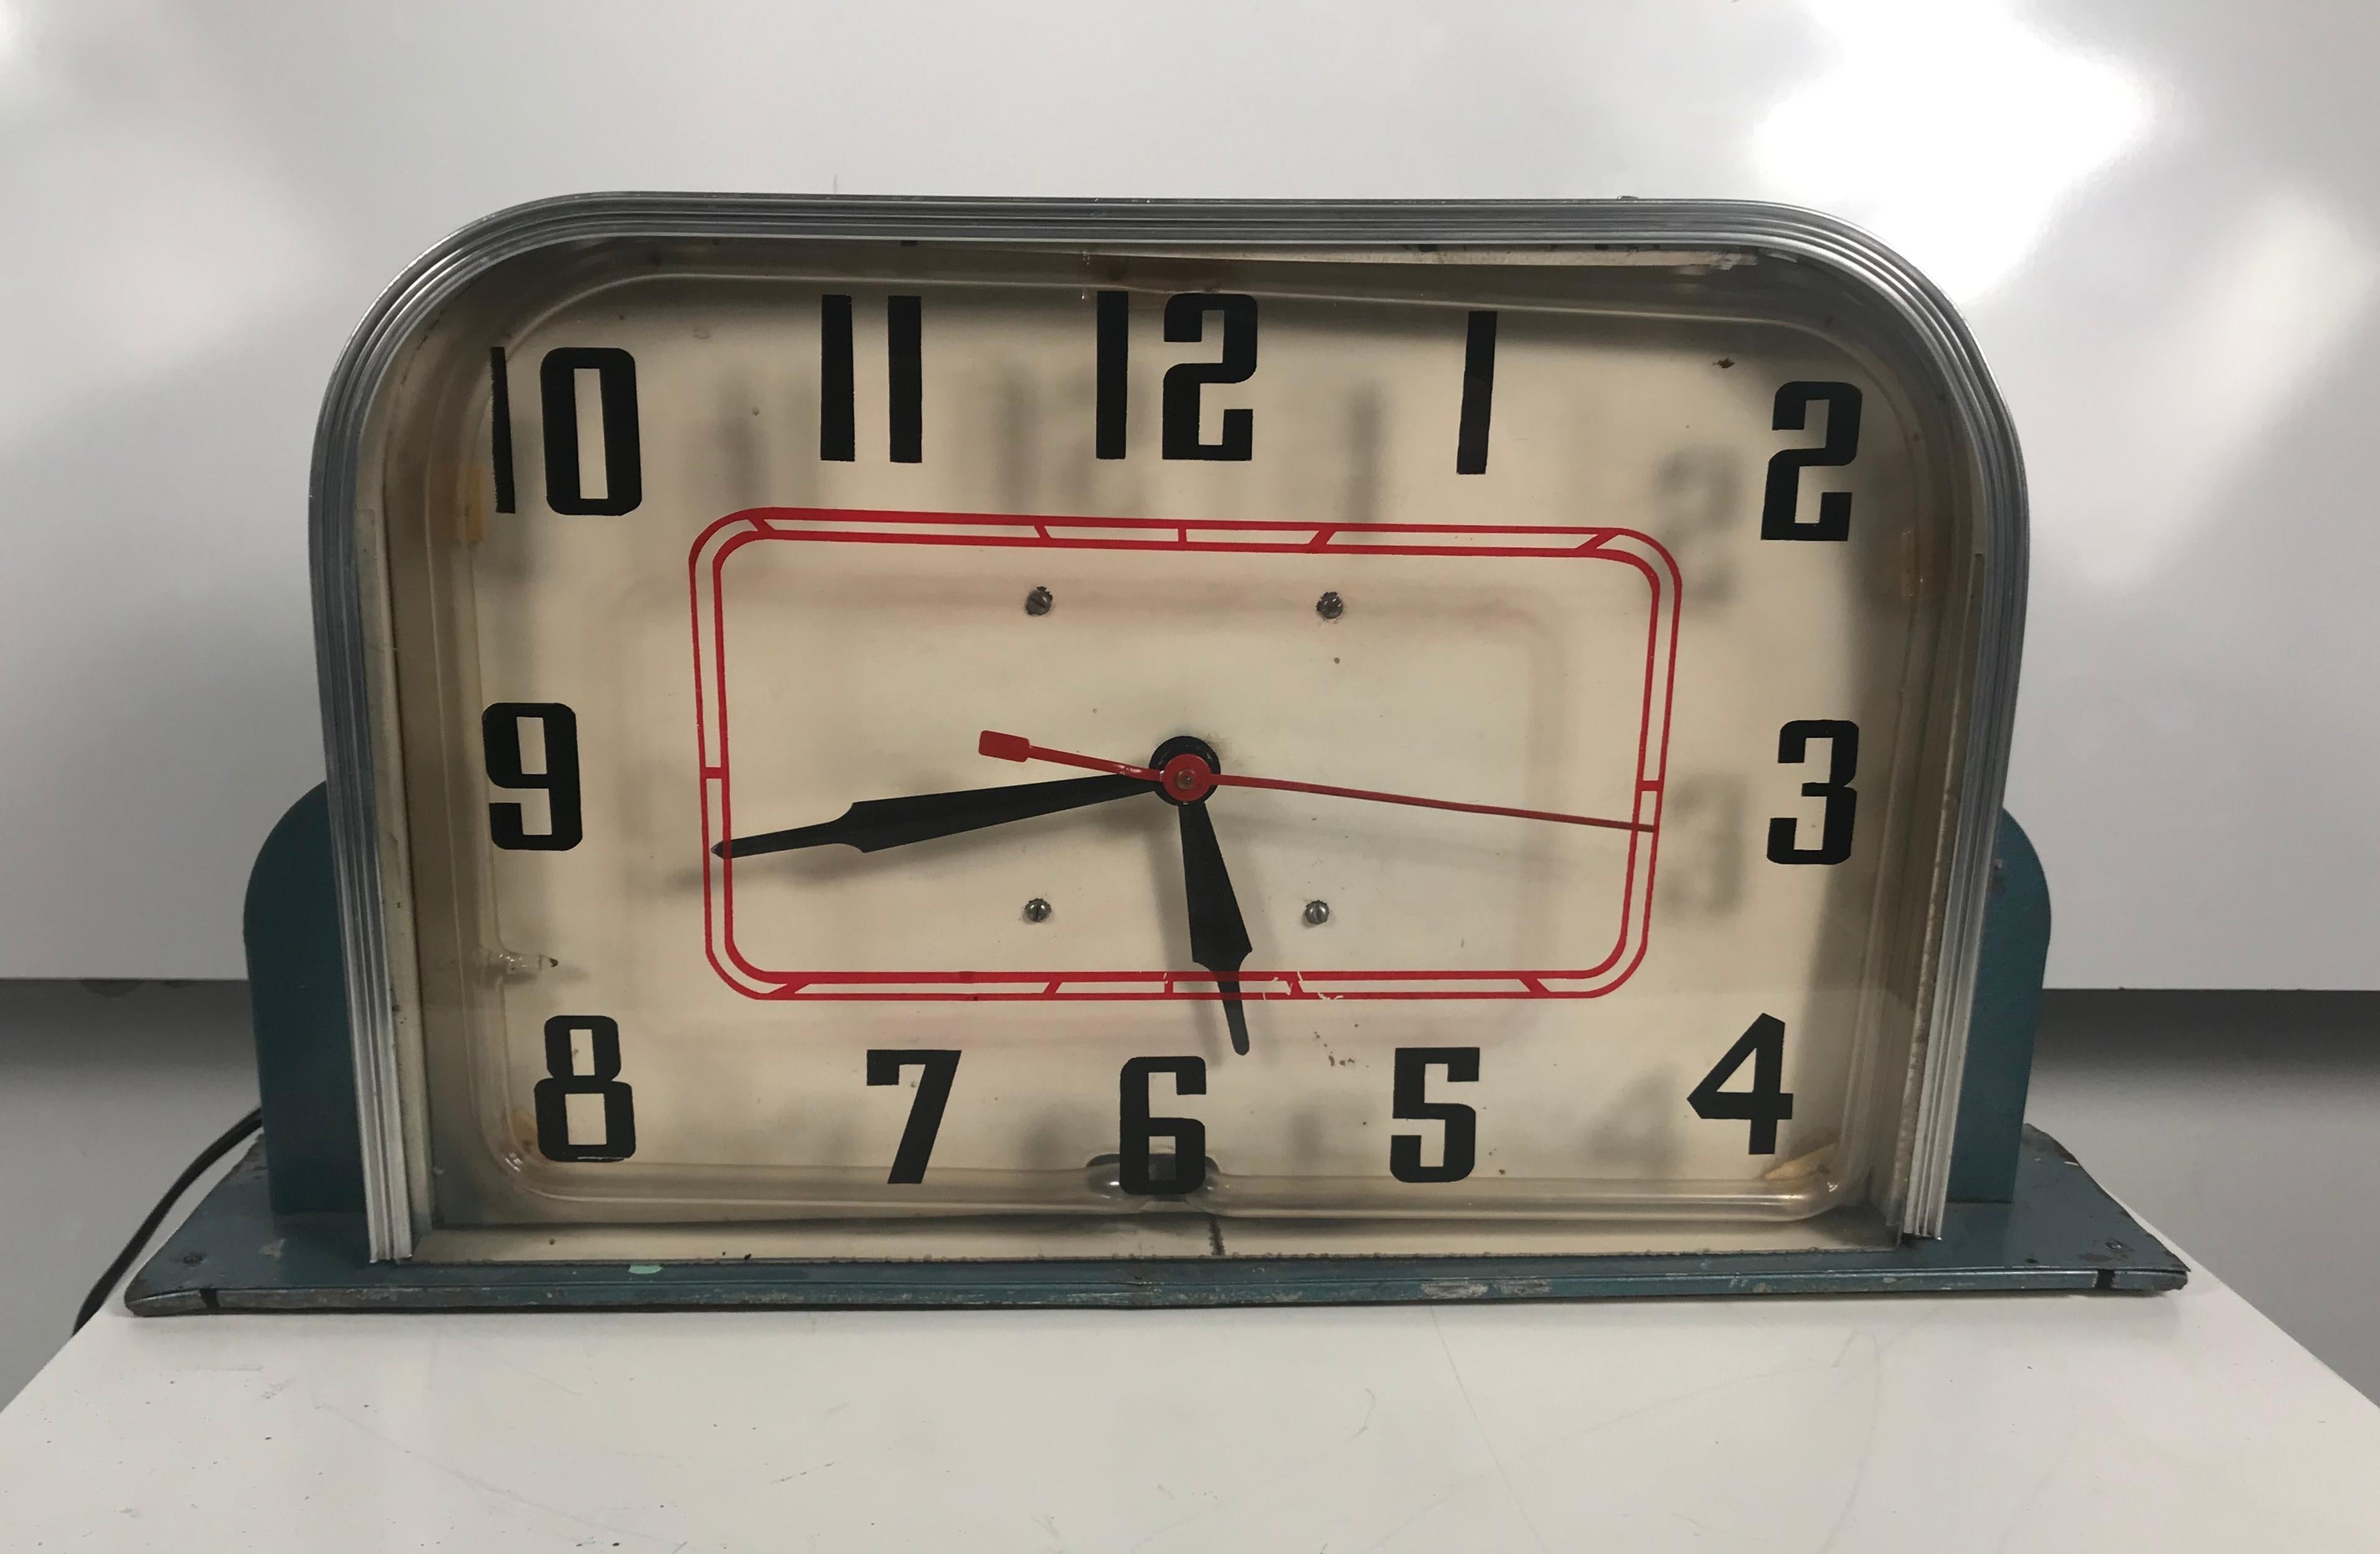 Art Deco table/ counter top Neon Clock made by Lackner, circa 1930s. Great little clock, original blue metal case, red neon. Retains sweeping second hand. Stylized Classic Art Deco design. Clock runs and keeps perfect time, on/off switch for red